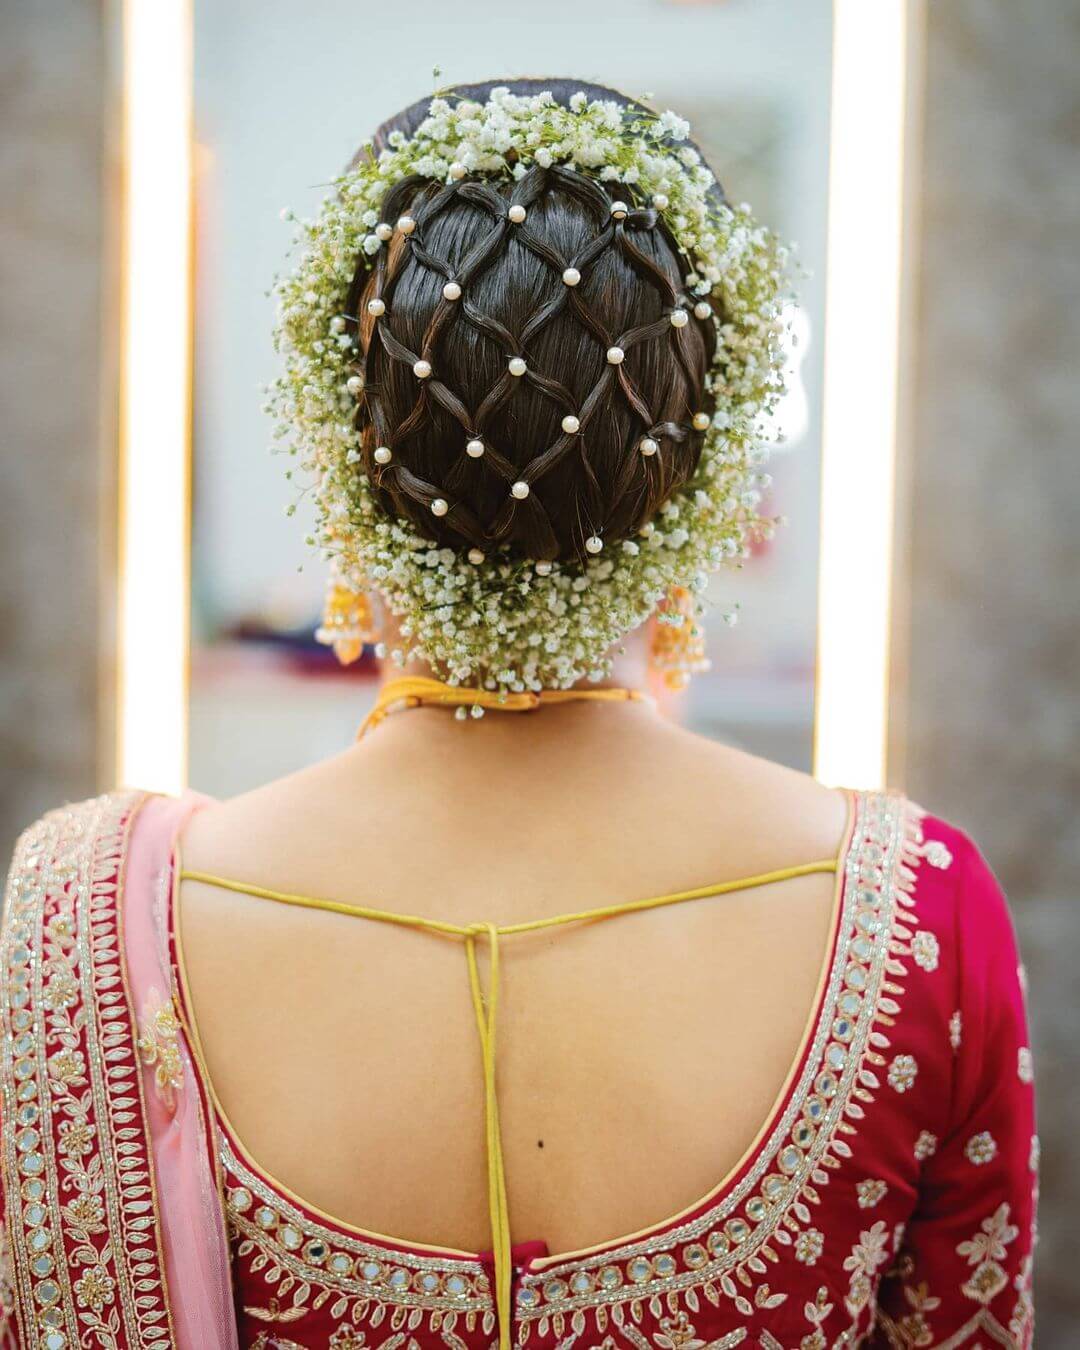 Top 10 South Indian Bridal Hairstyles That Are Sure To Get You A Lots Of  Compliments  South India Trends